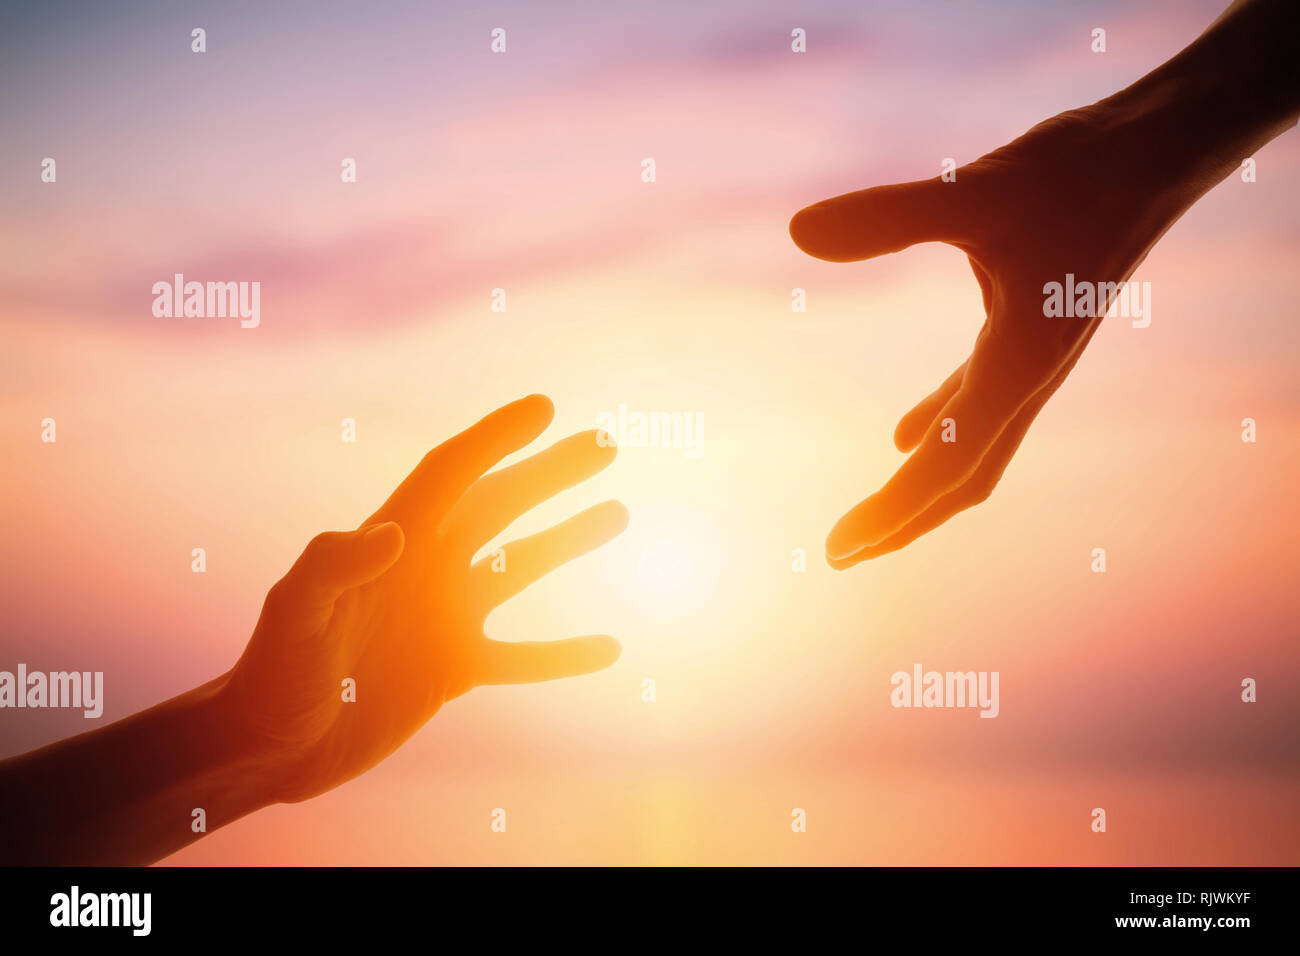 Giving a helping hand on the background of the dawn Stock Photo